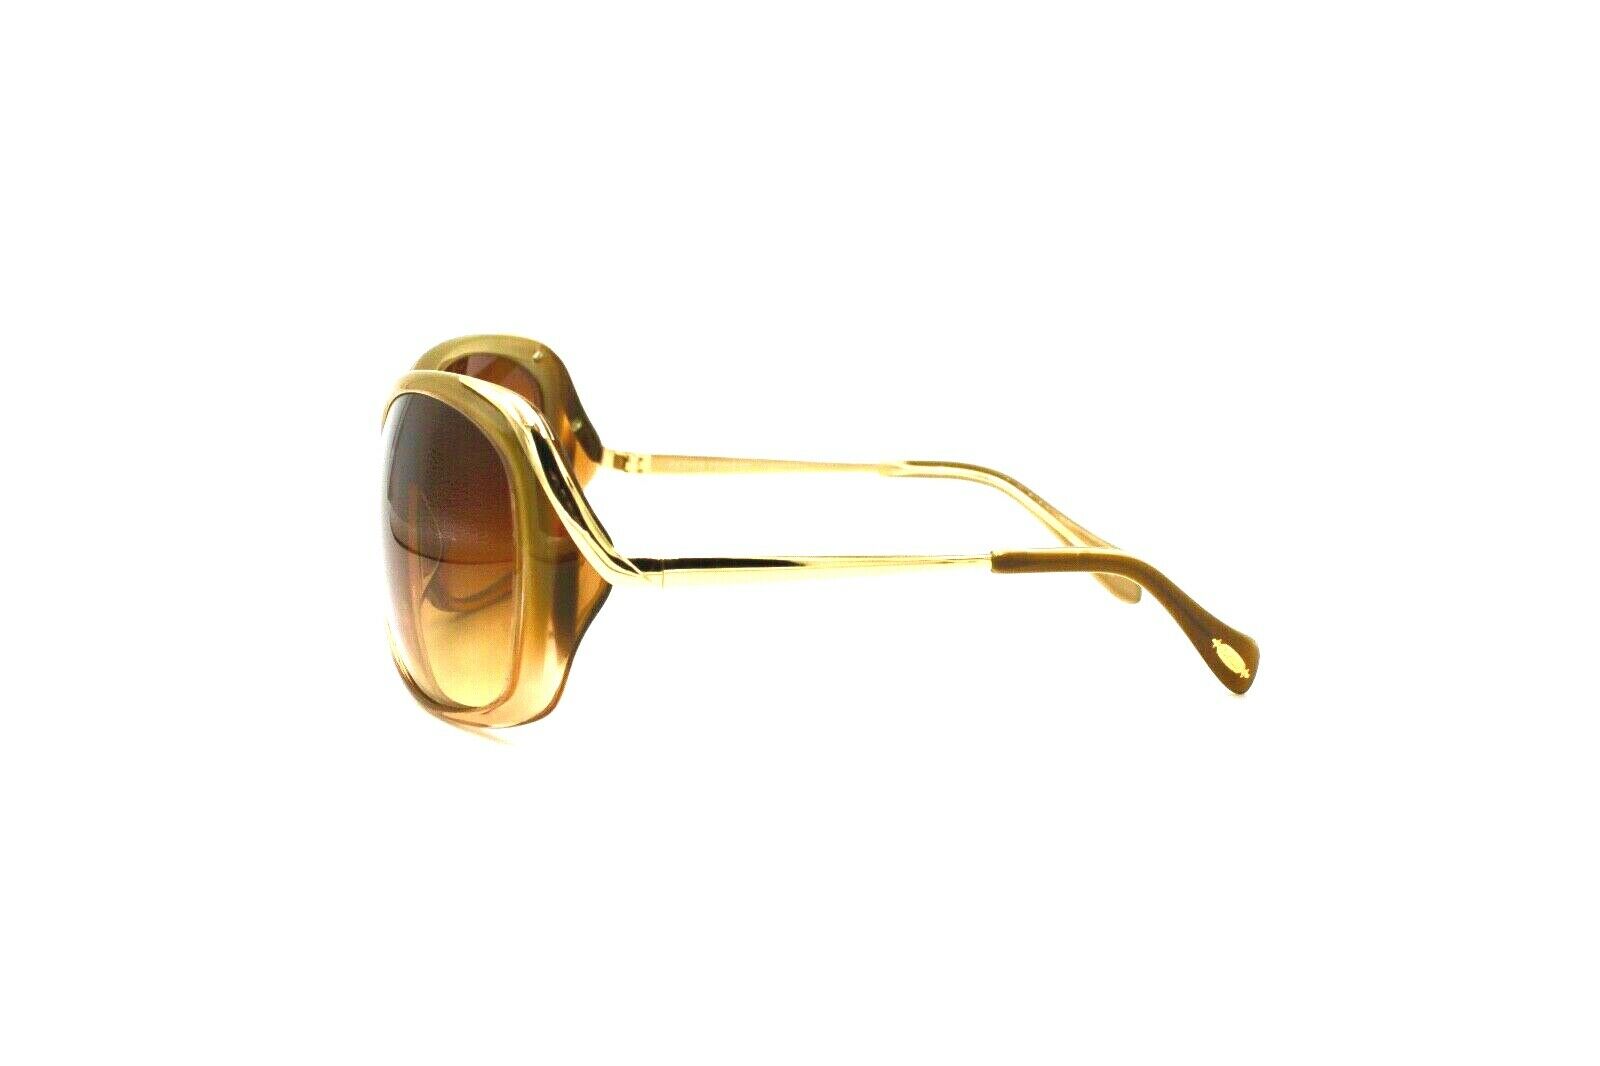 Oliver Peoples Sunglasses 65 15-115 Marbella TZGR Made in Japan